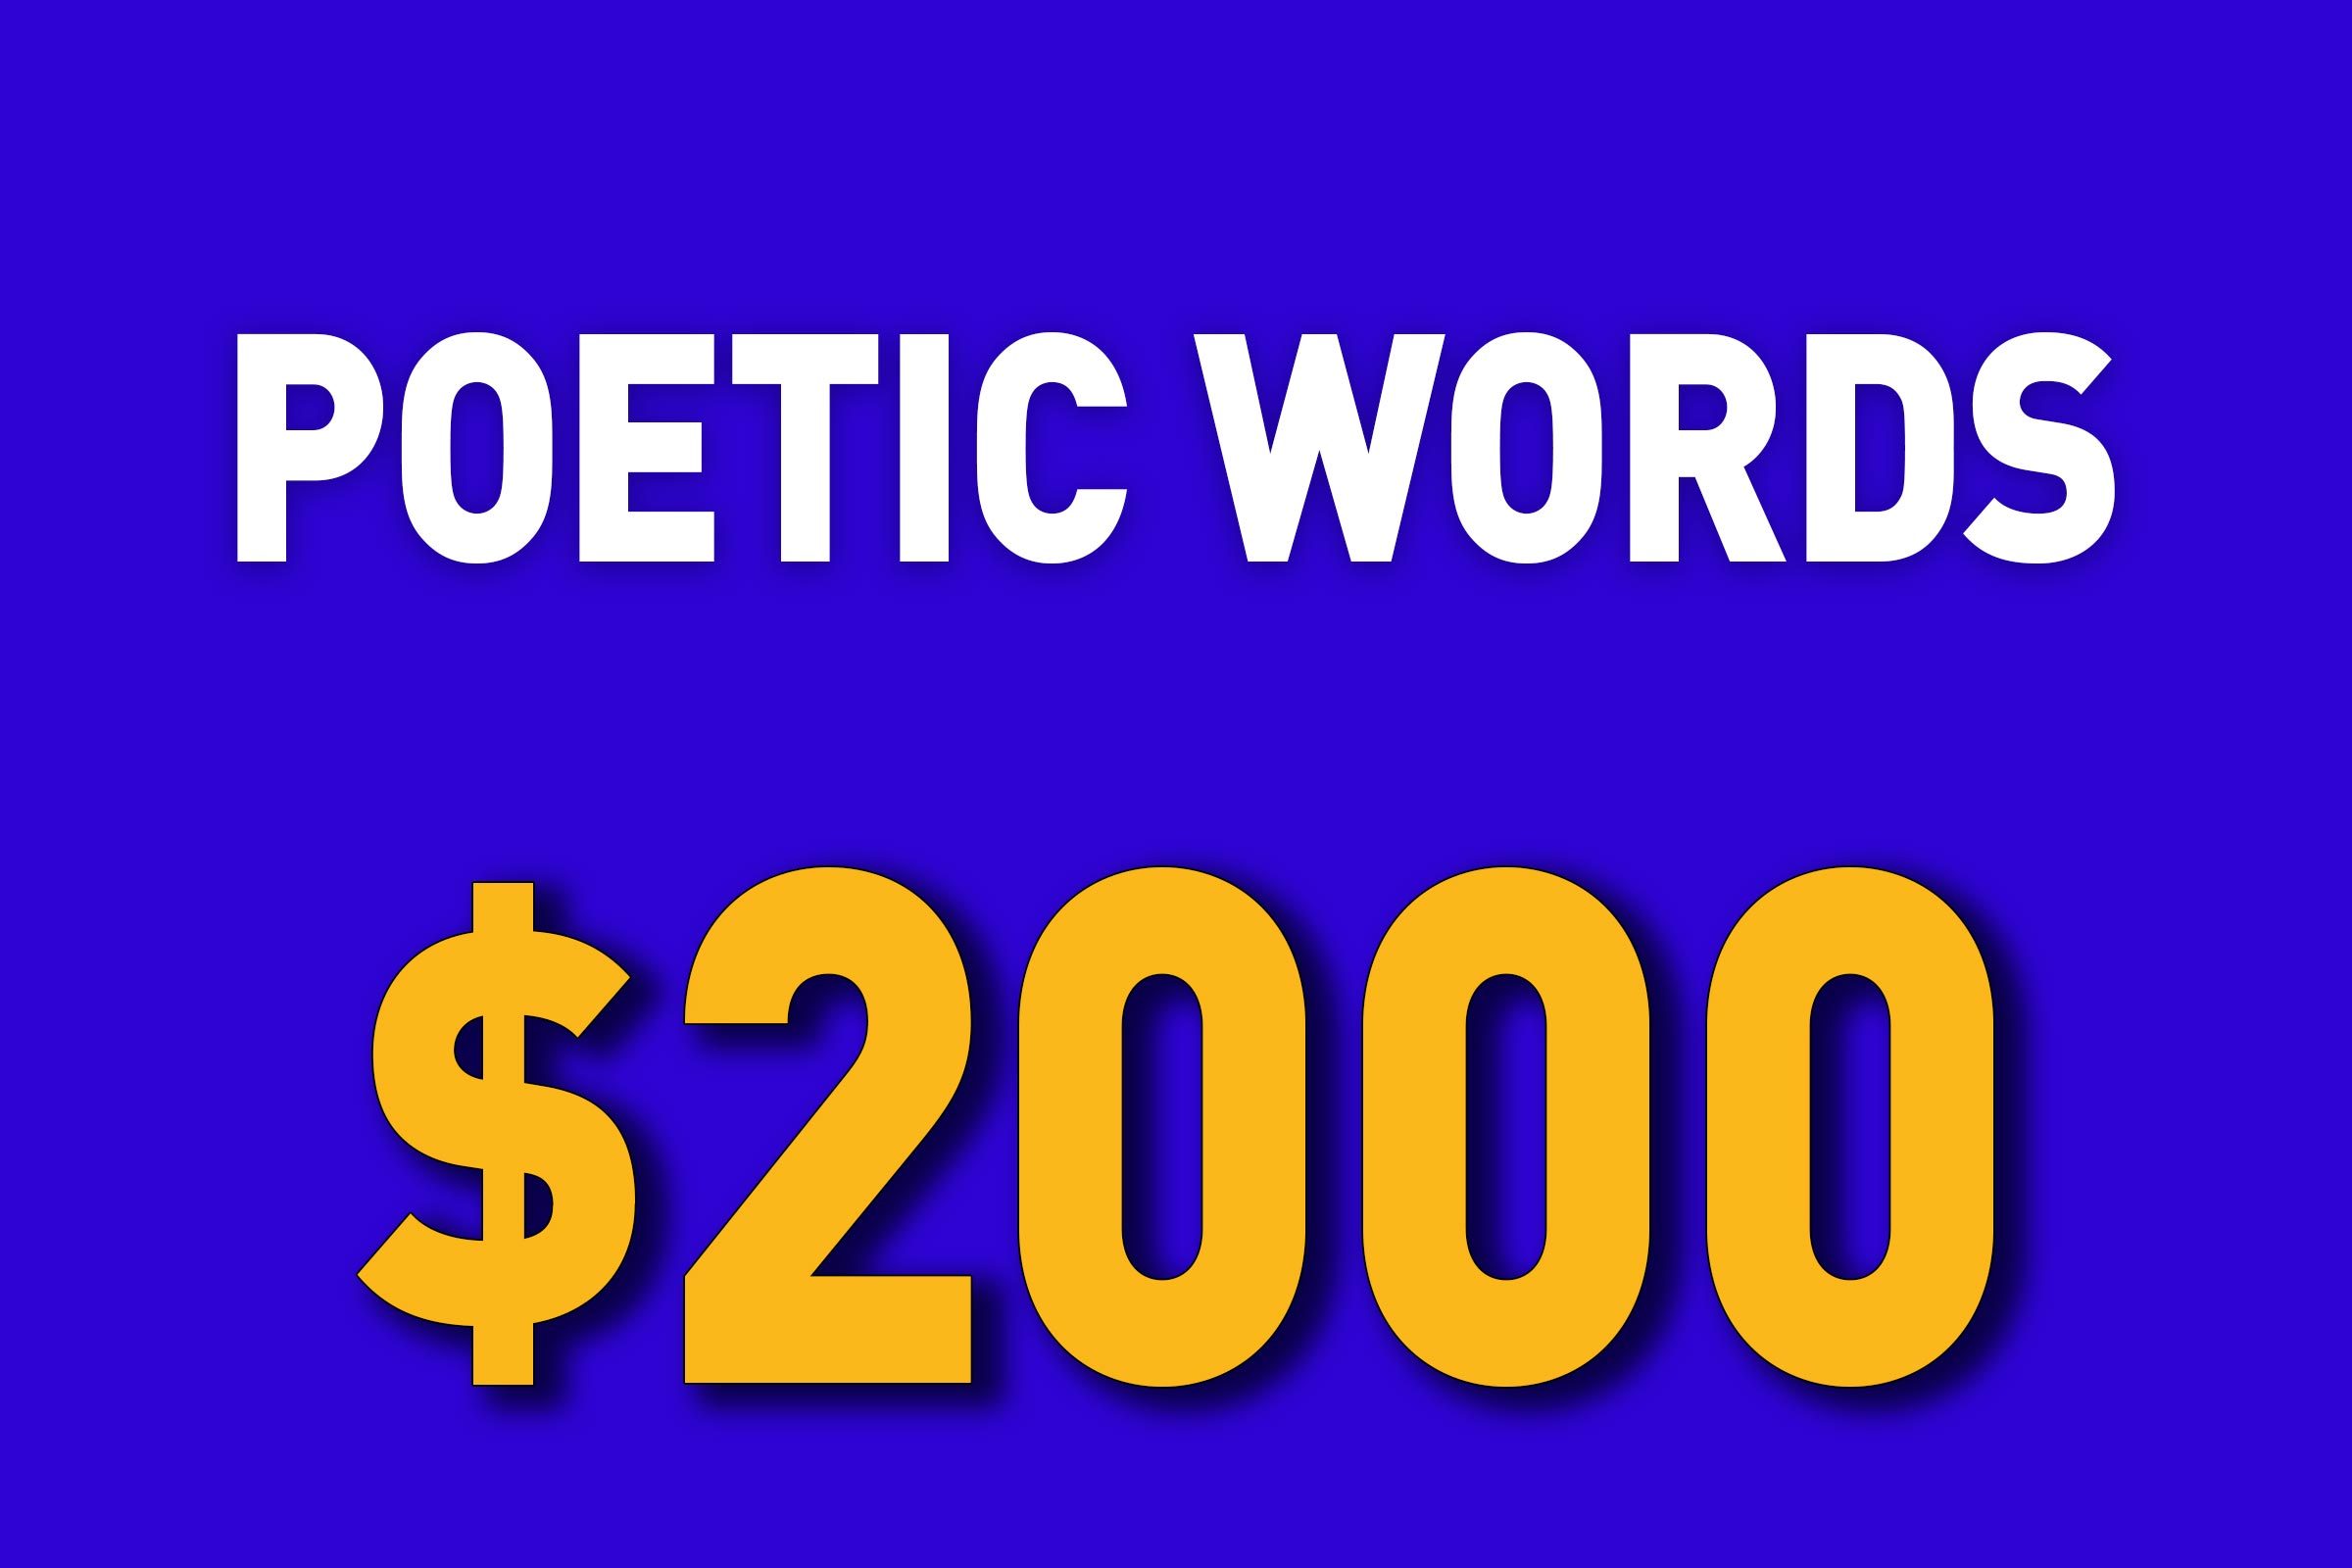 Poetic Words for $2000